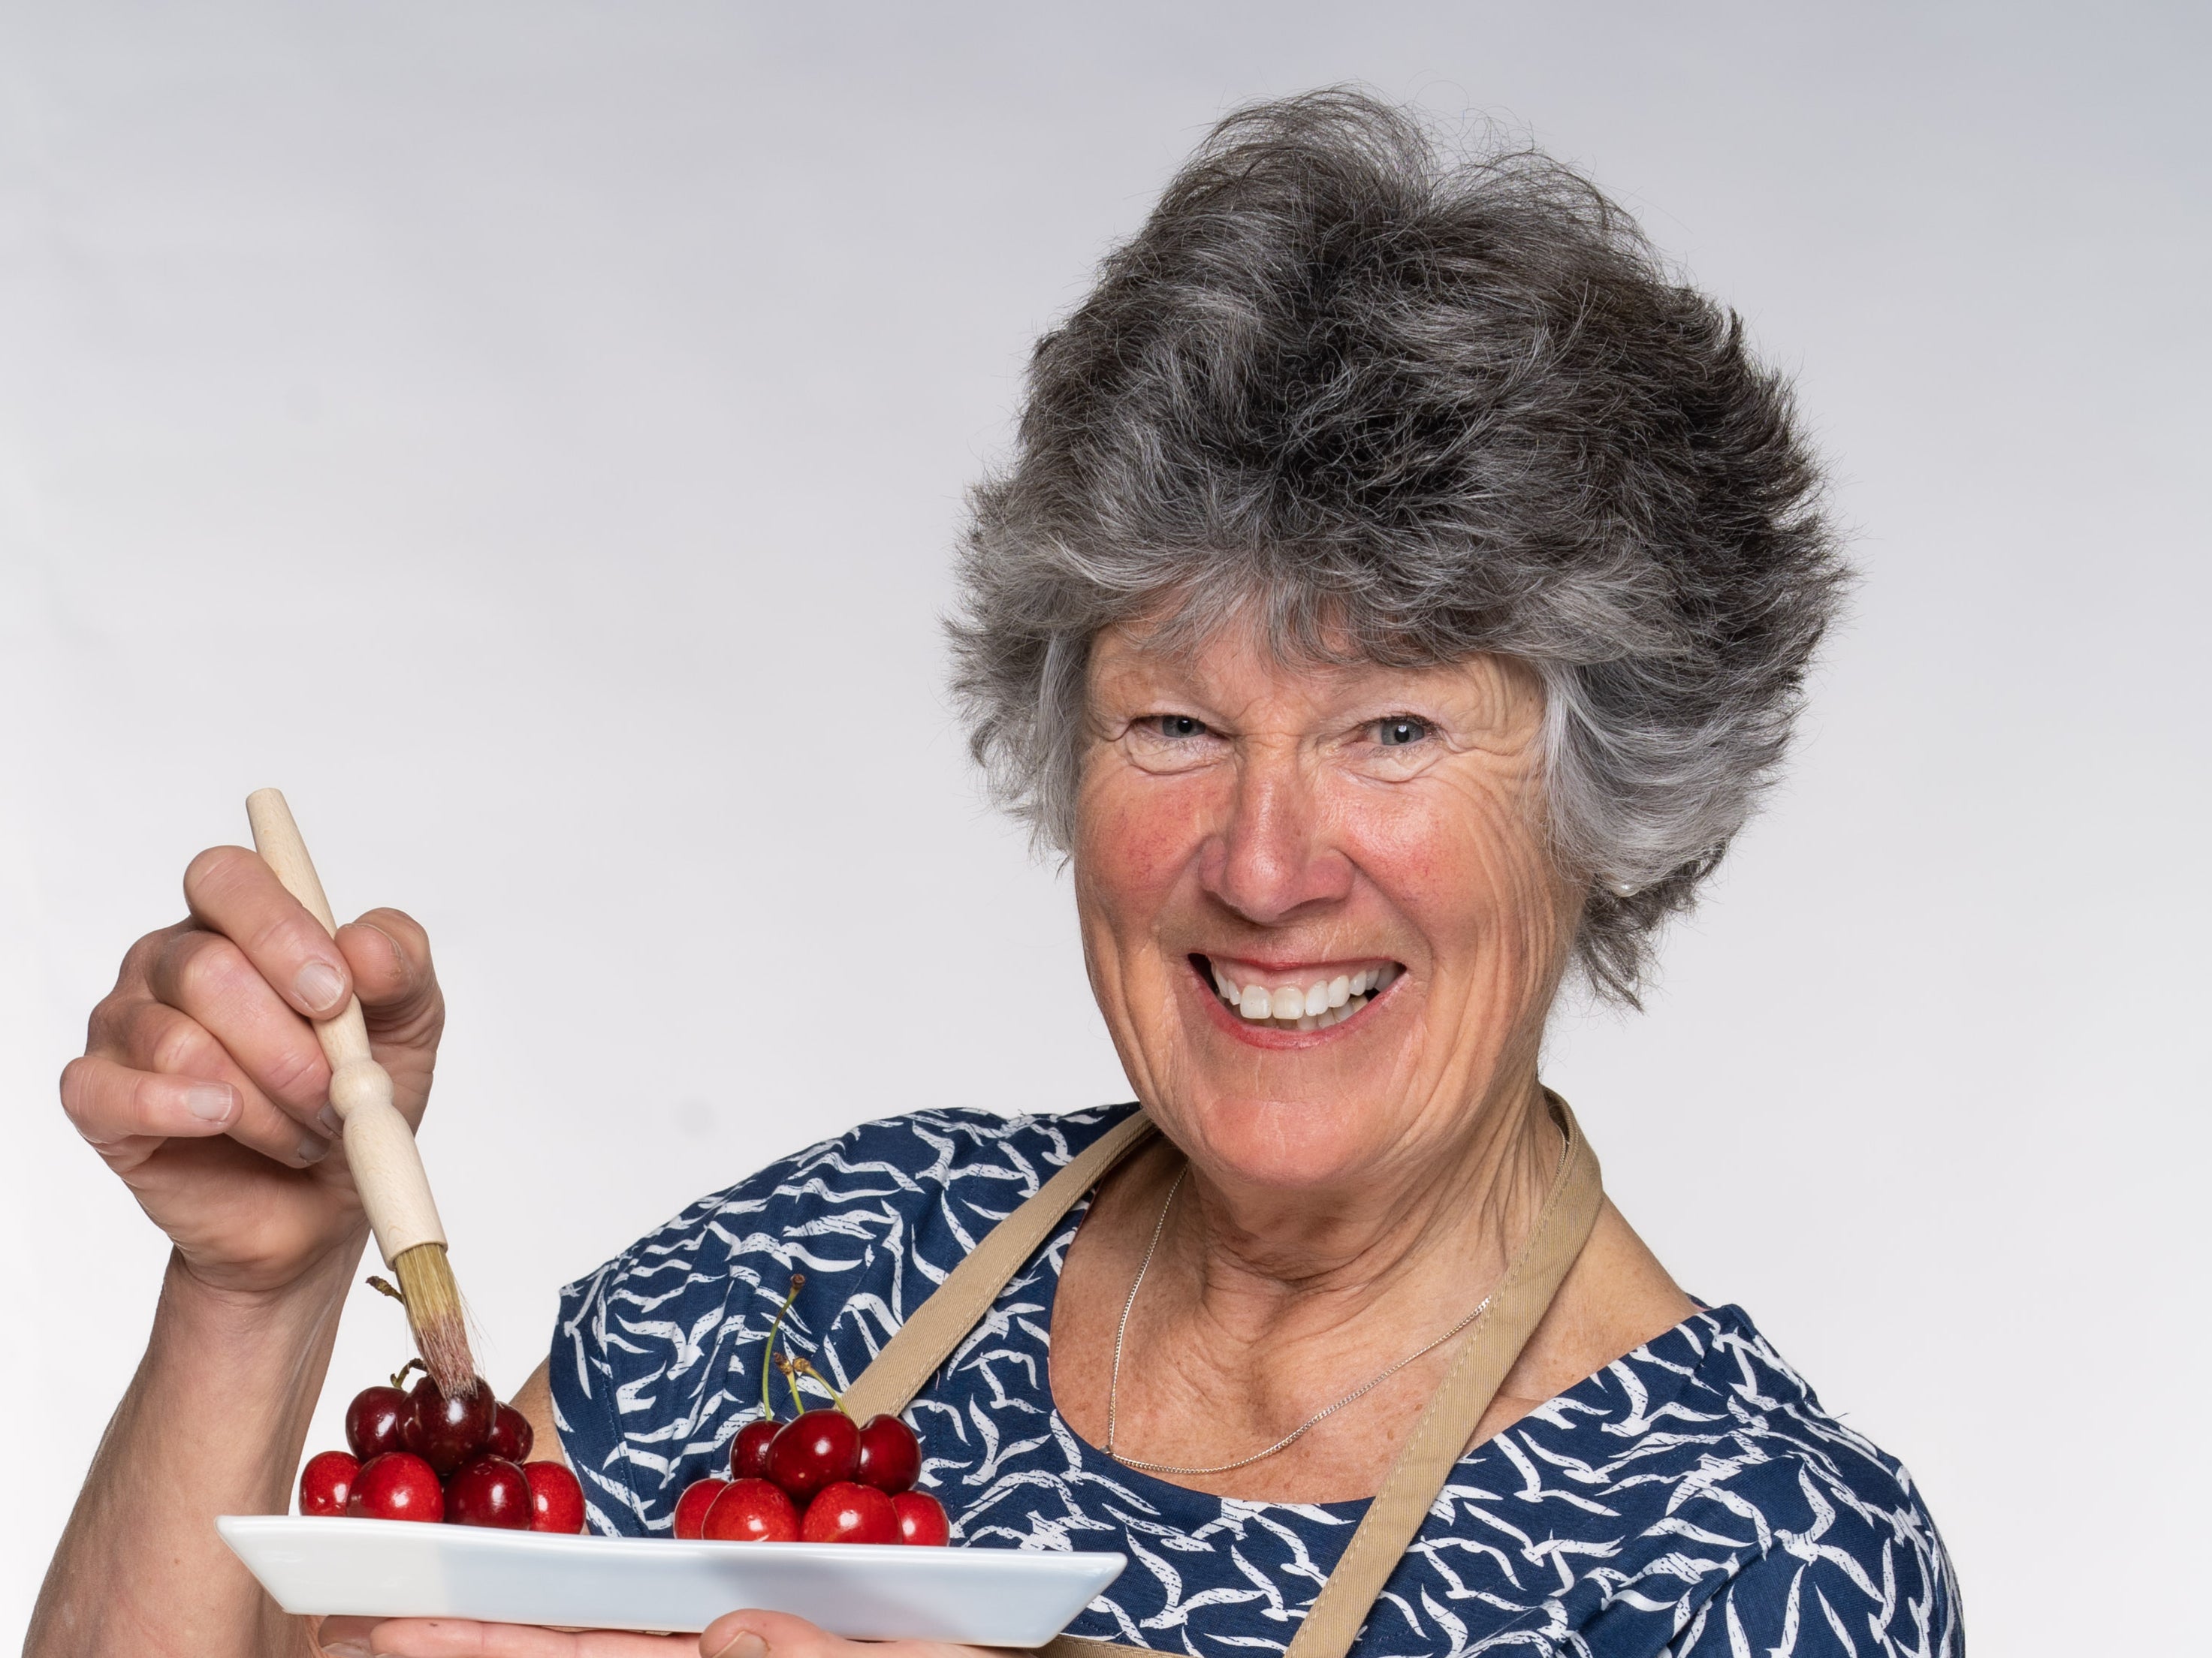 ‘Bake Off’ contestant Maggie